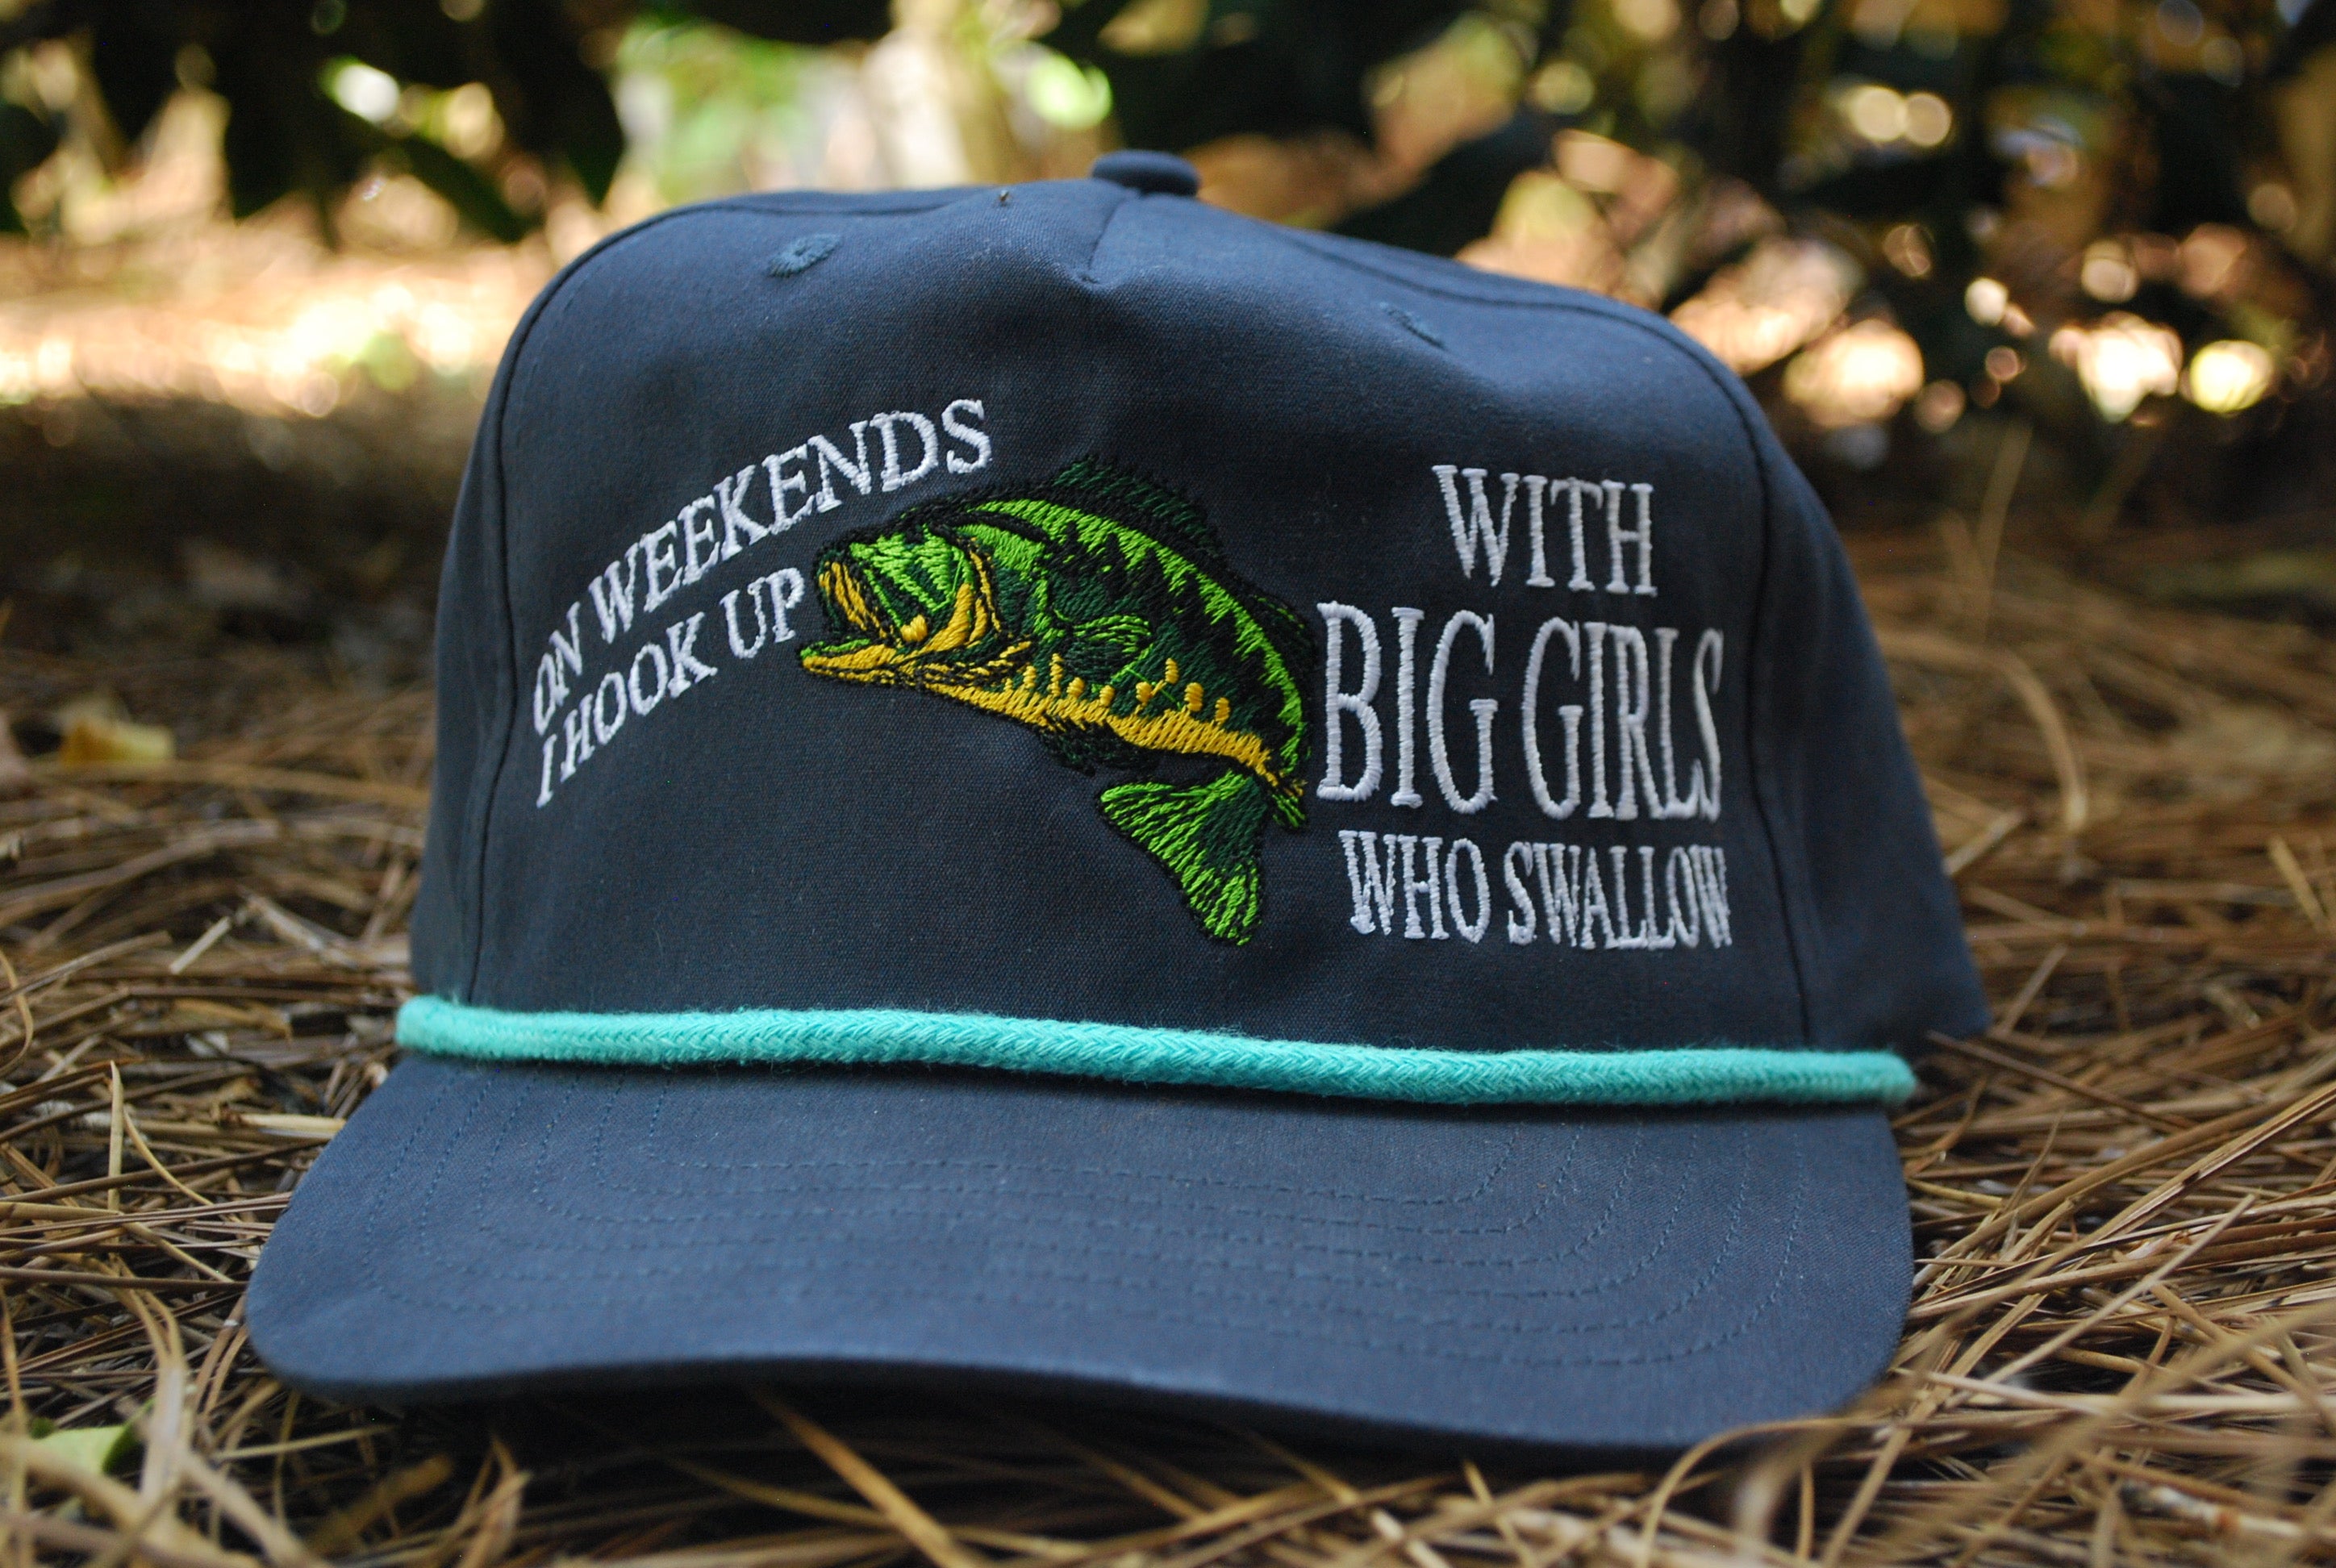 ON WEEKENDS I HOOK UP WITH BIG GIRLS WHO SWALLOW Funny Fishing Navy  SnapBack Teal Rope Golf Hat Cap Custom Embroidered